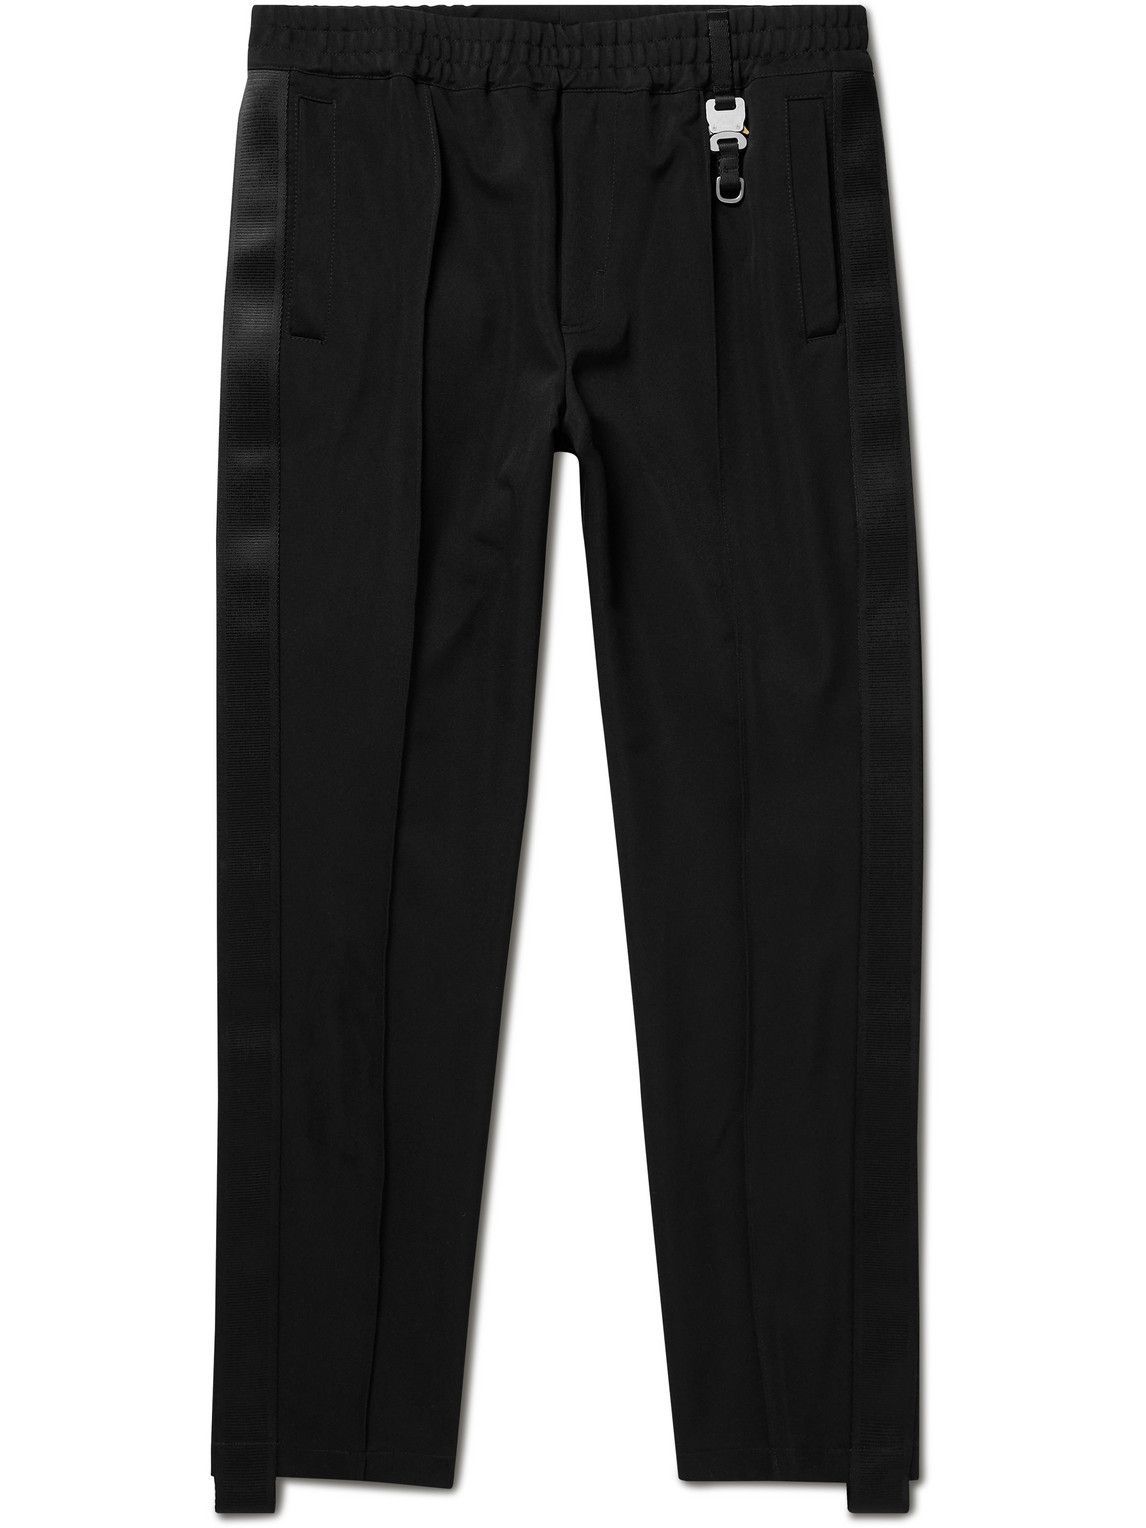 Photo: 1017 ALYX 9SM - Tapered Buckle-Embellished Jersey Sweatpants - Black